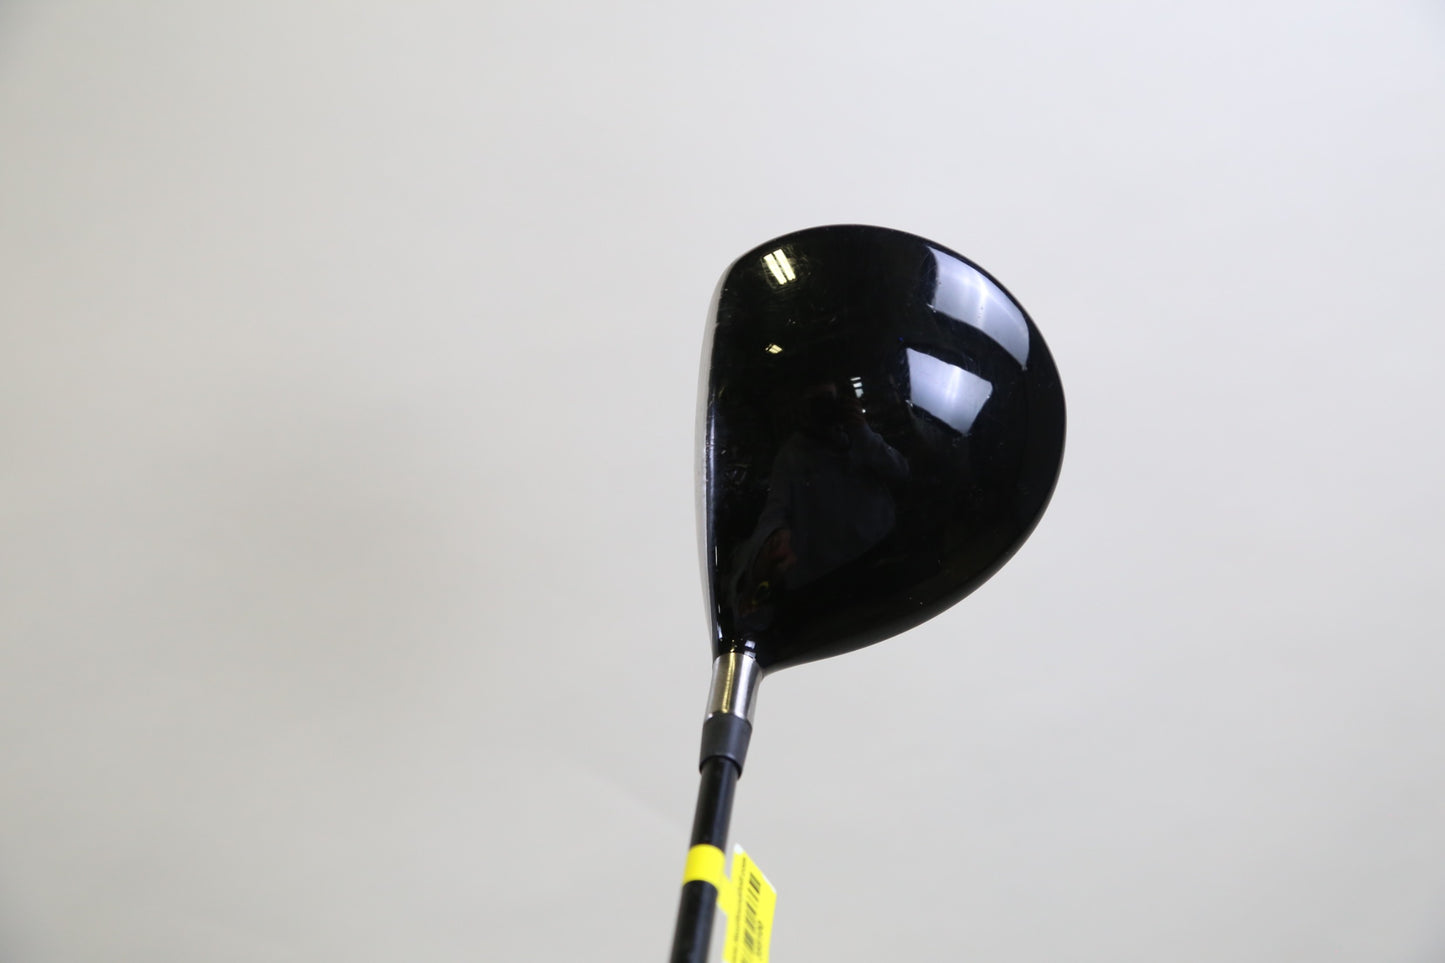 Used TaylorMade R540 Driver - Right-Handed - 10.5 Degrees - Regular Flex-Next Round